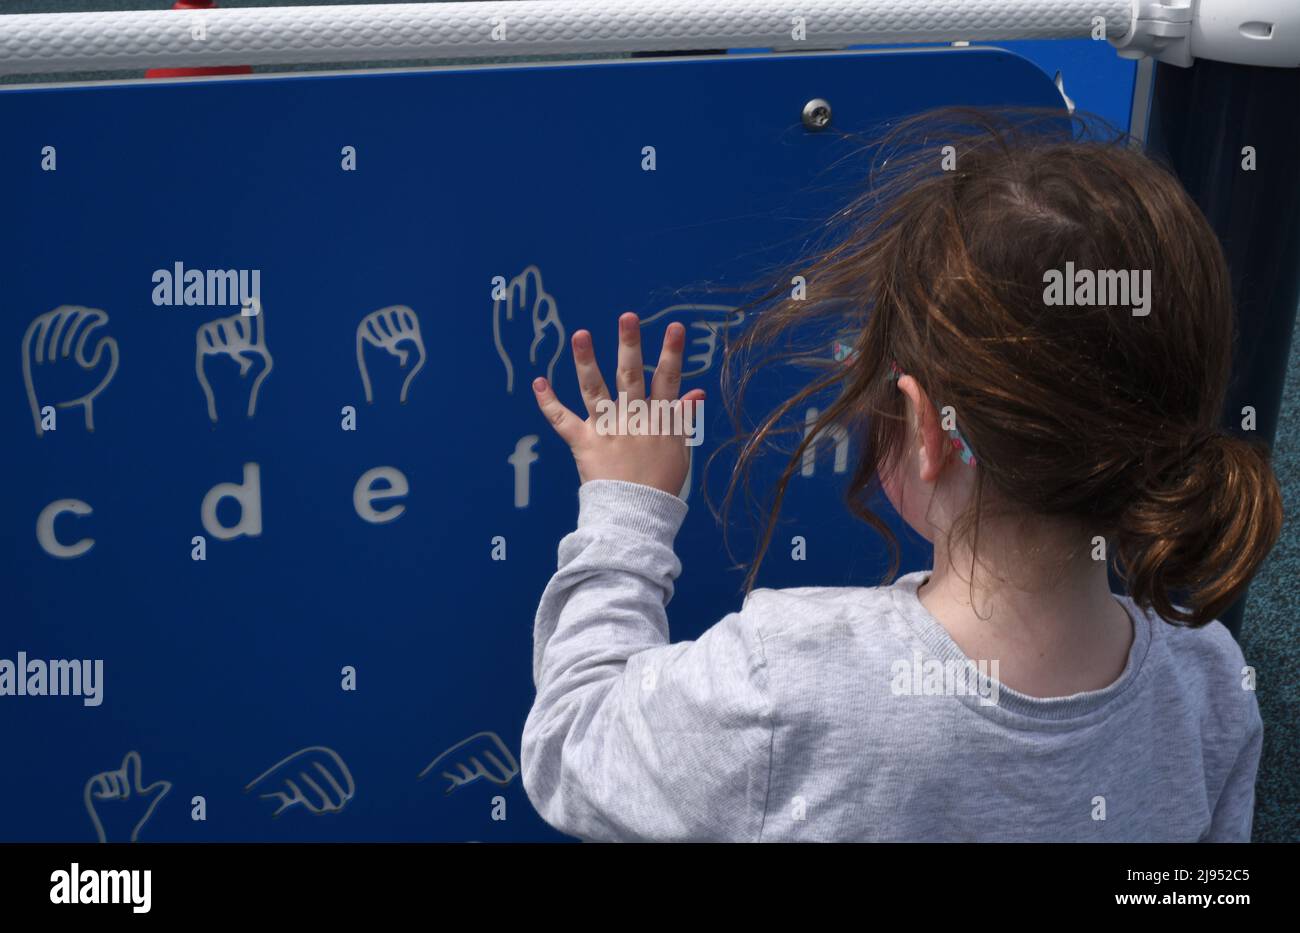 A young girl looks over a sign language chart in a playground in Edmonton, Alberta, Canada Stock Photo